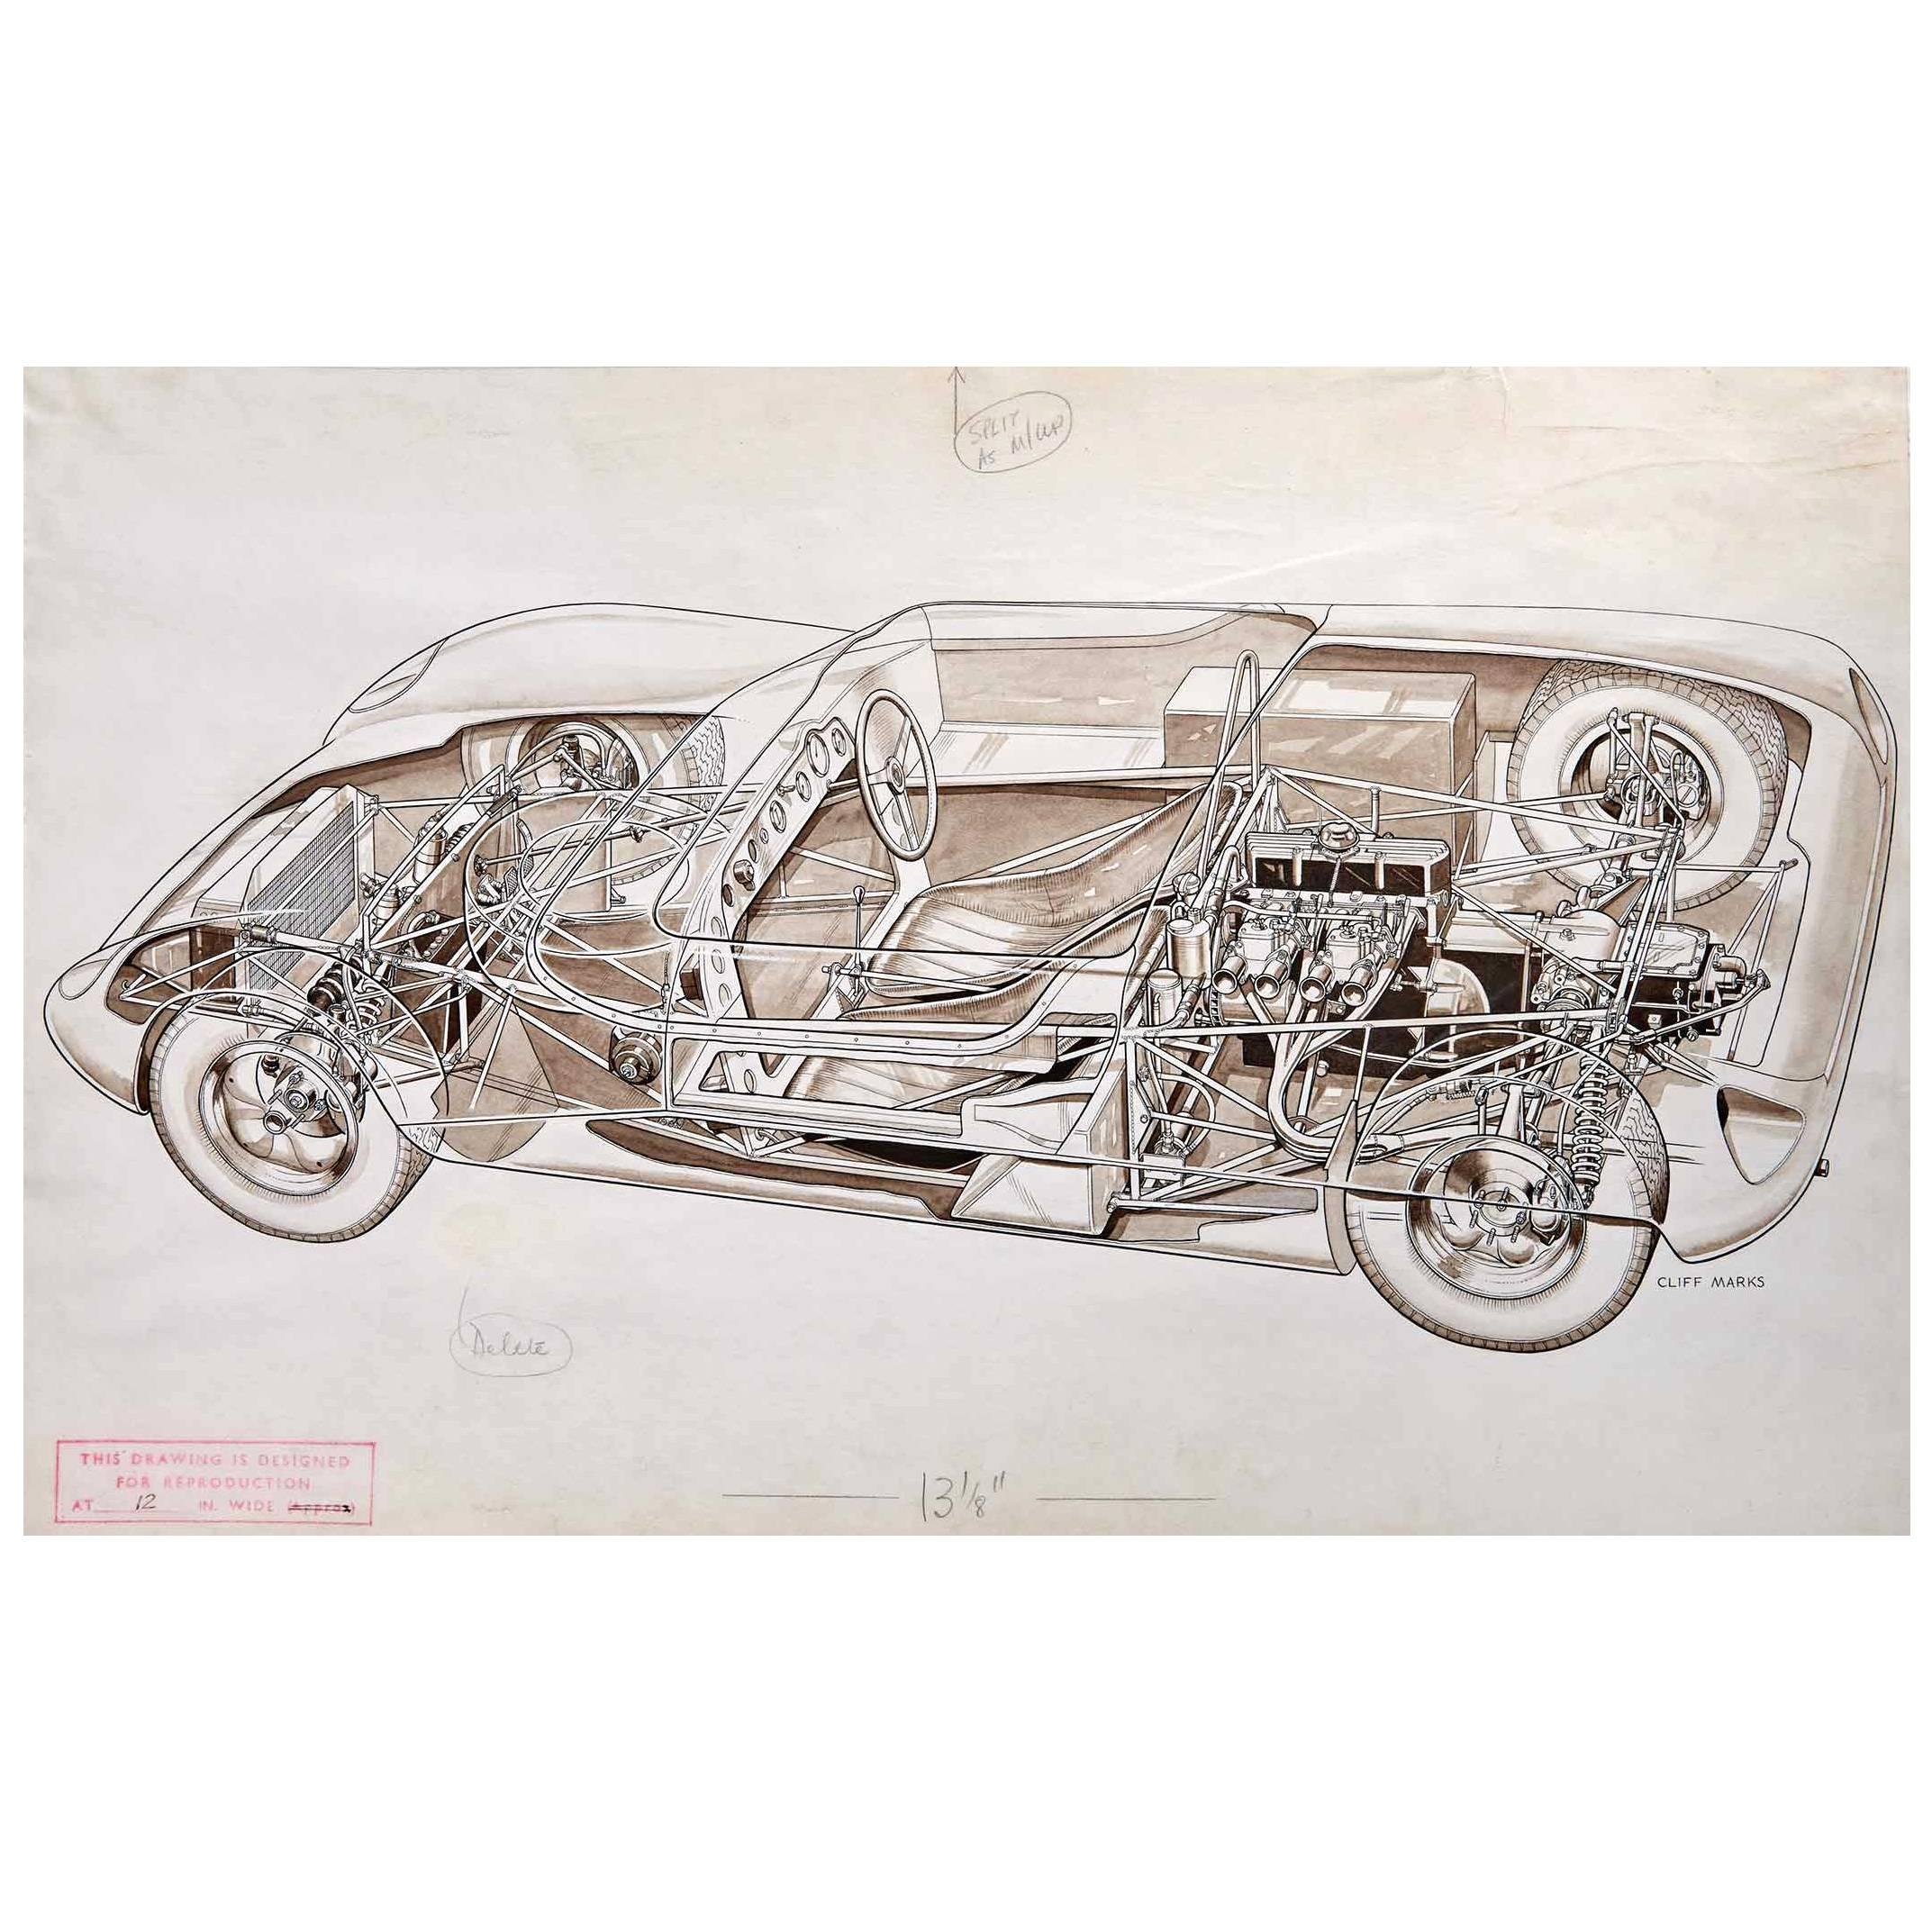 Original "Cutaway" Drawing of the Lotus 23 Racing Car by Cliff Marks